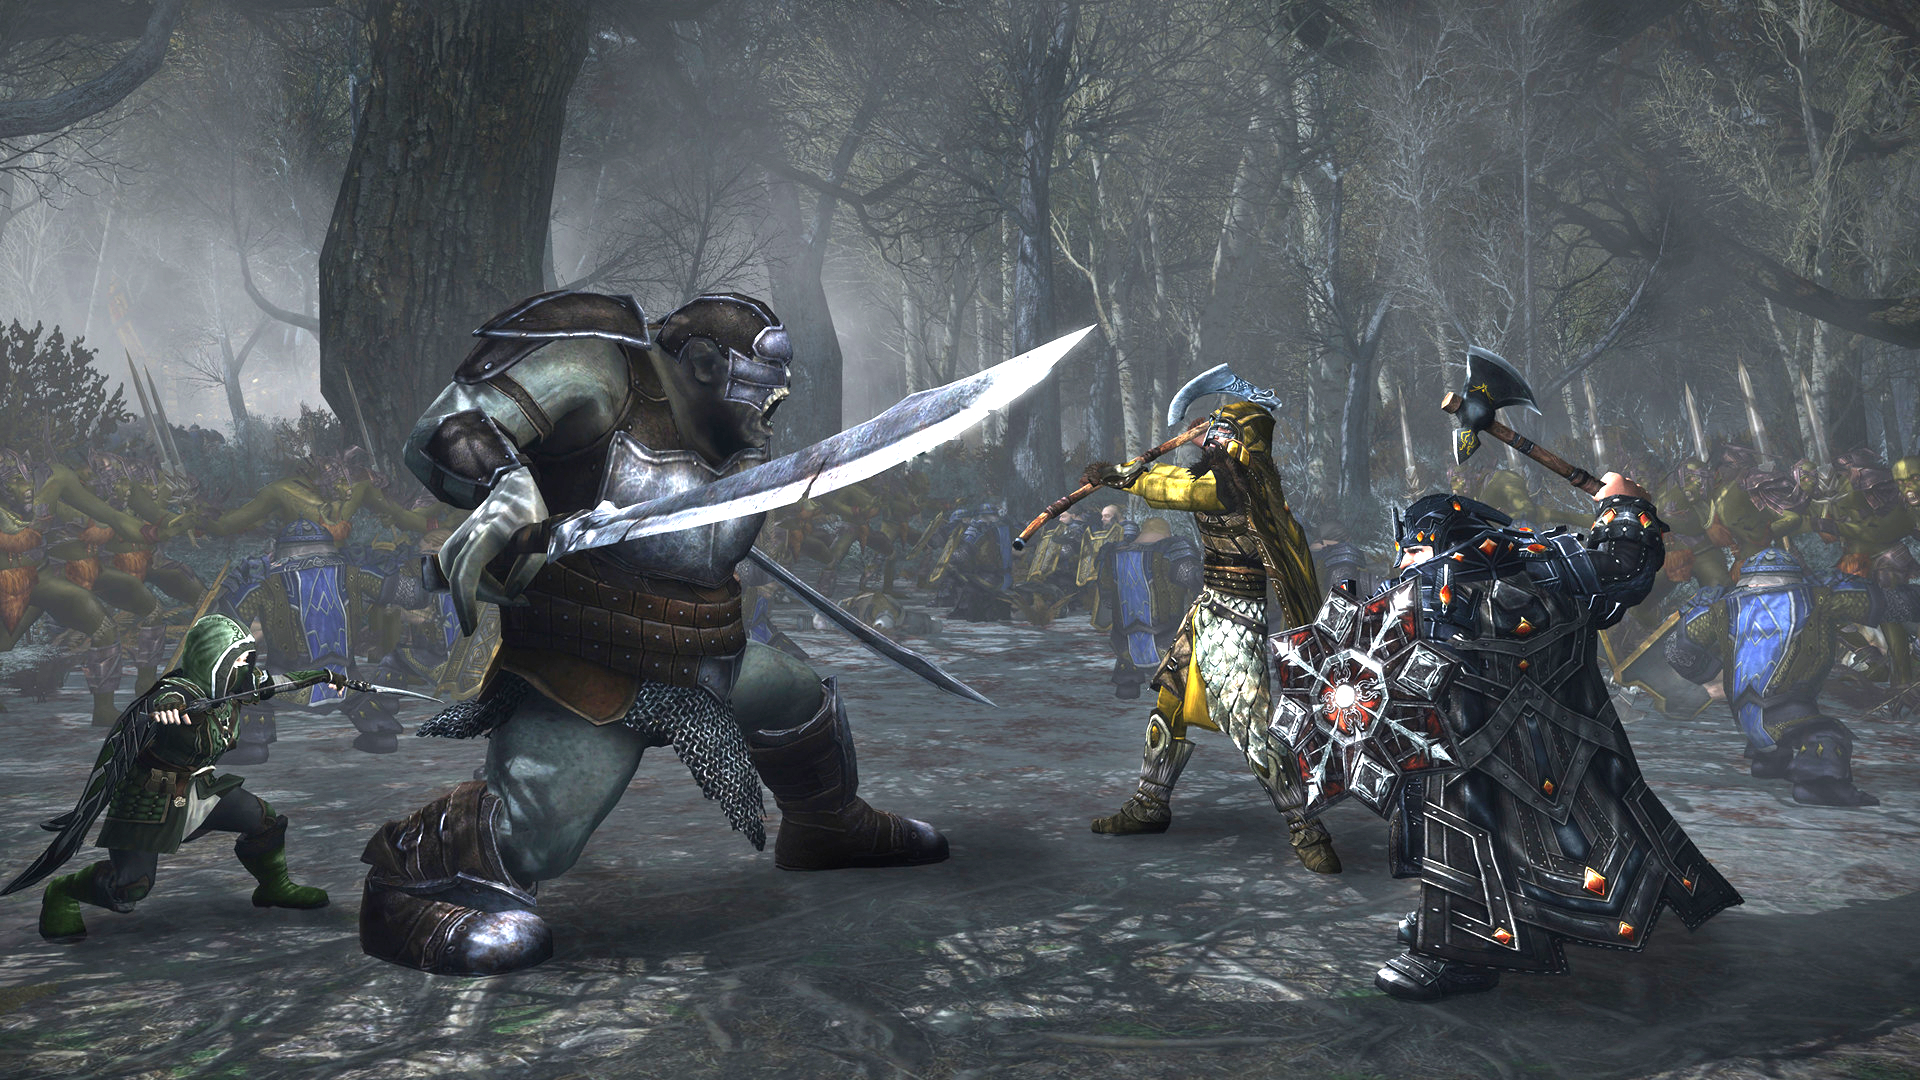 A dwarf and elf fighting a troll in the Lord of the Rings Online